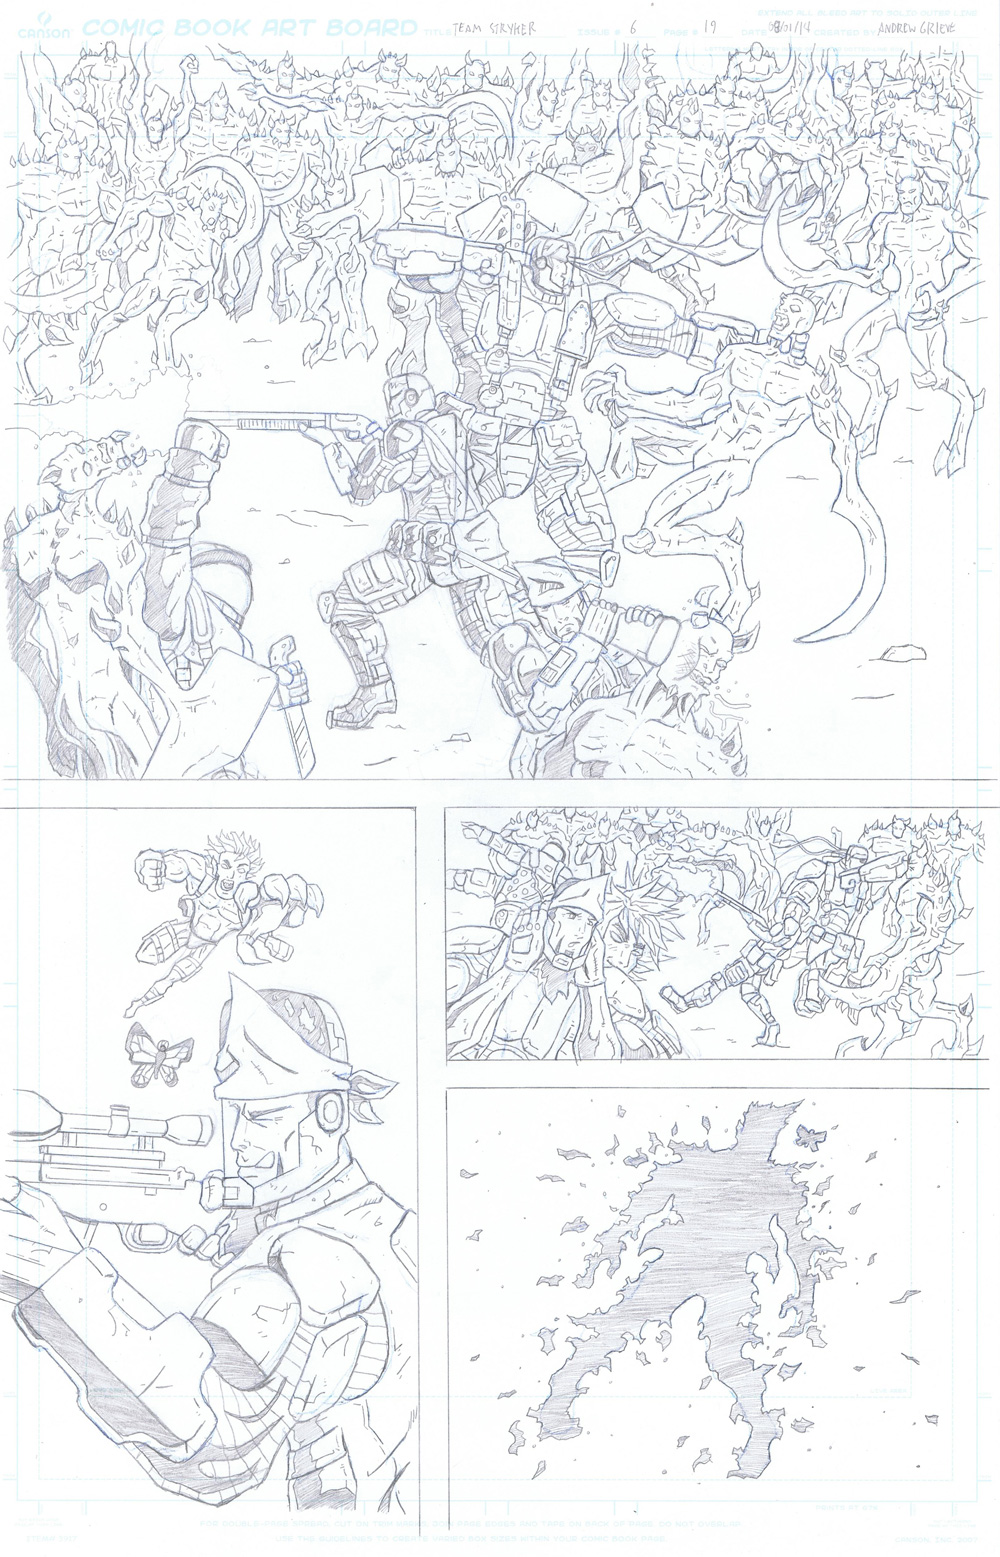 MISSION 006: PAGE 19 PENCIL